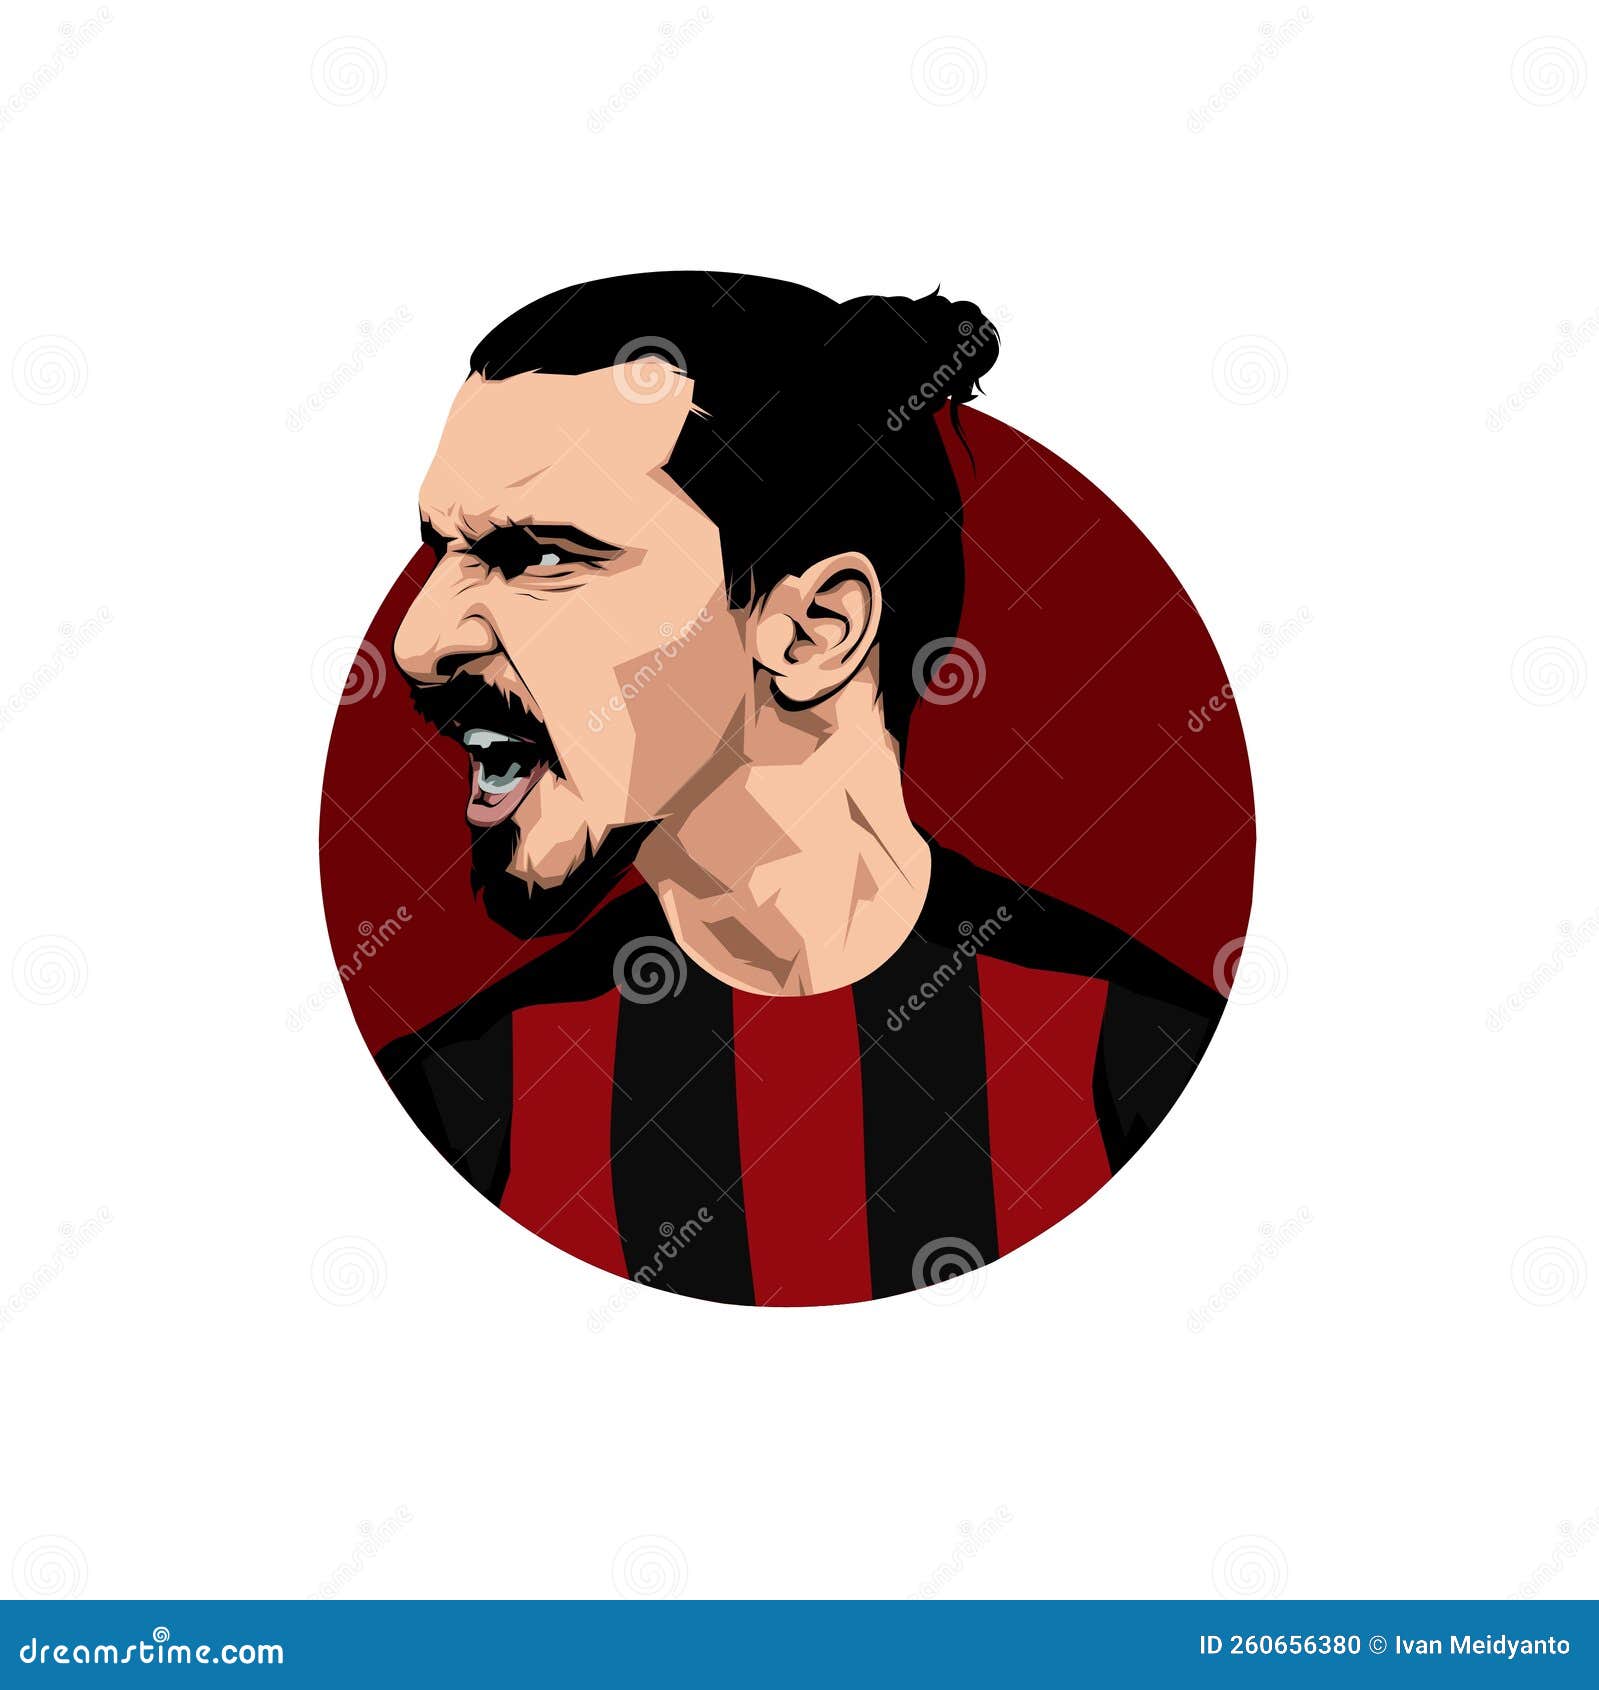 Ac Milan: Over 232 Royalty-Free Licensable Stock Illustrations & Drawings